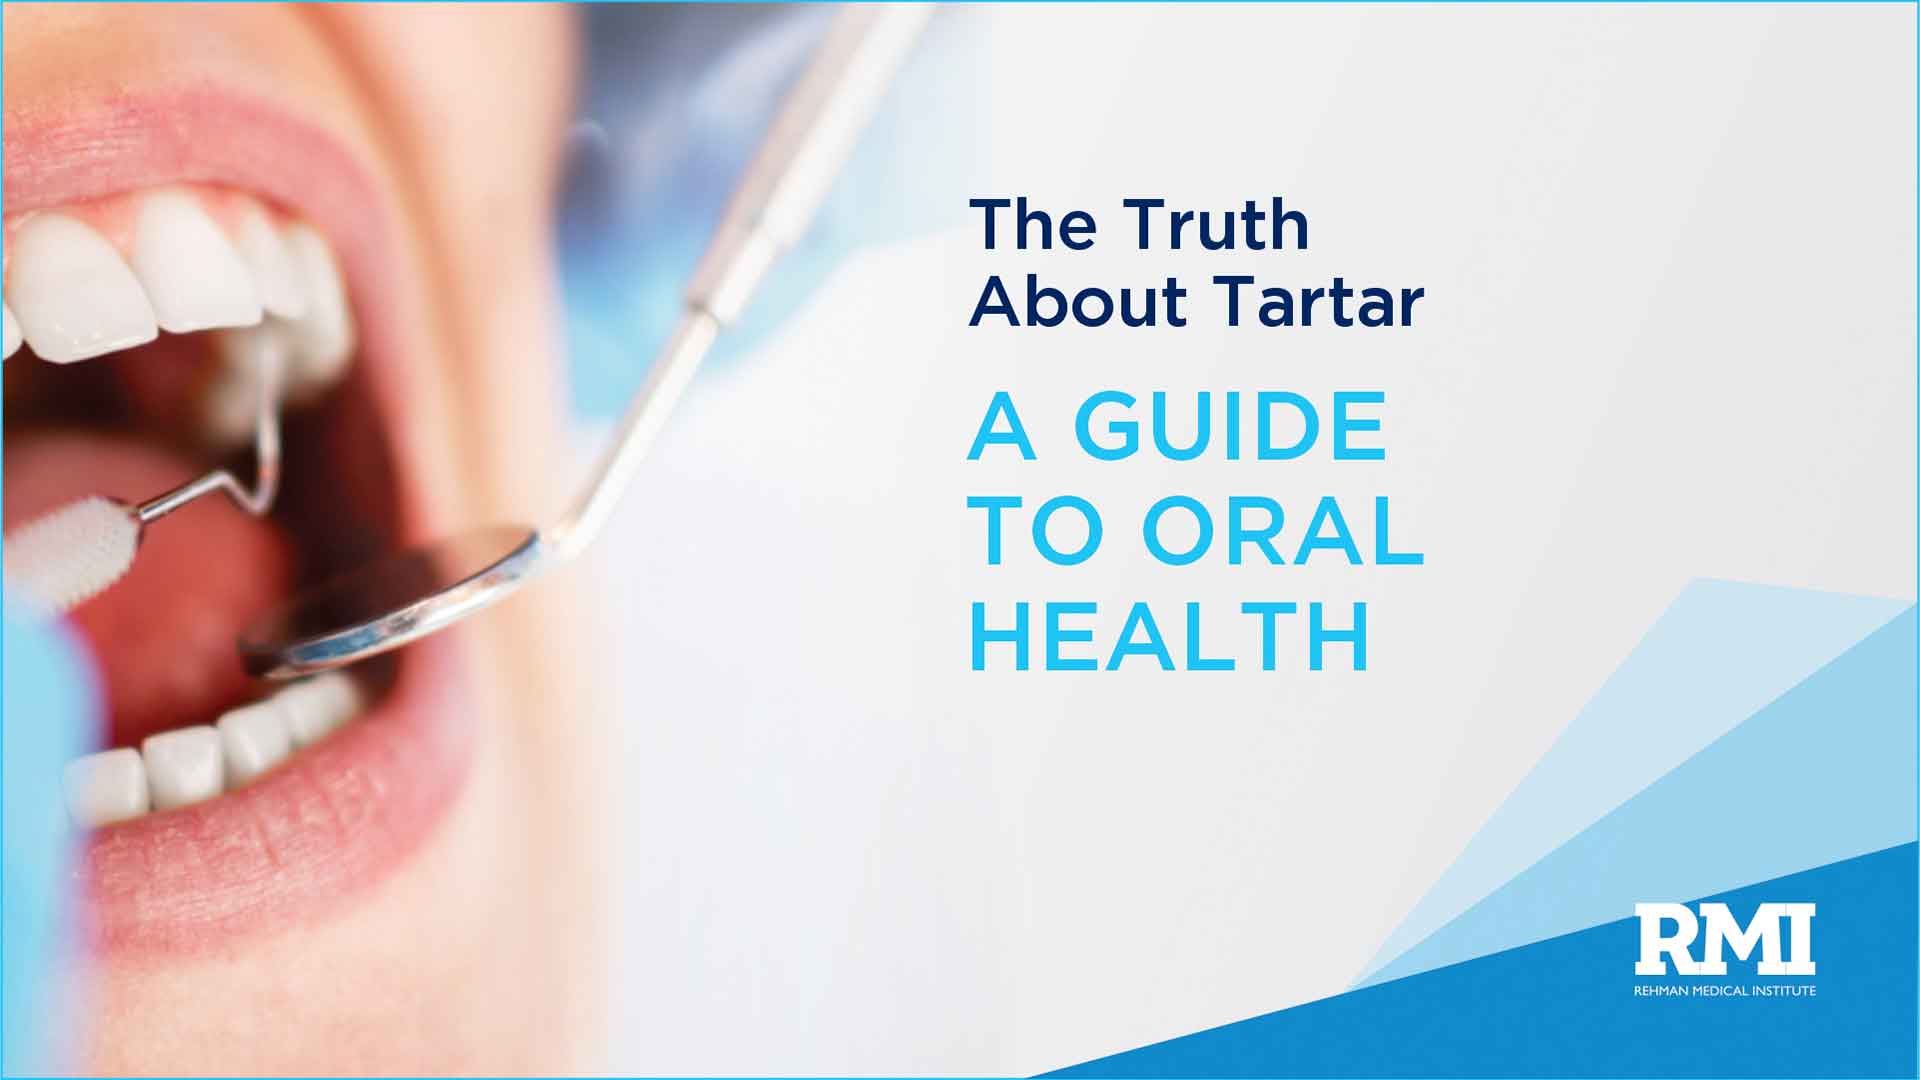 The Truth About Tartar: A Guide to Oral Health